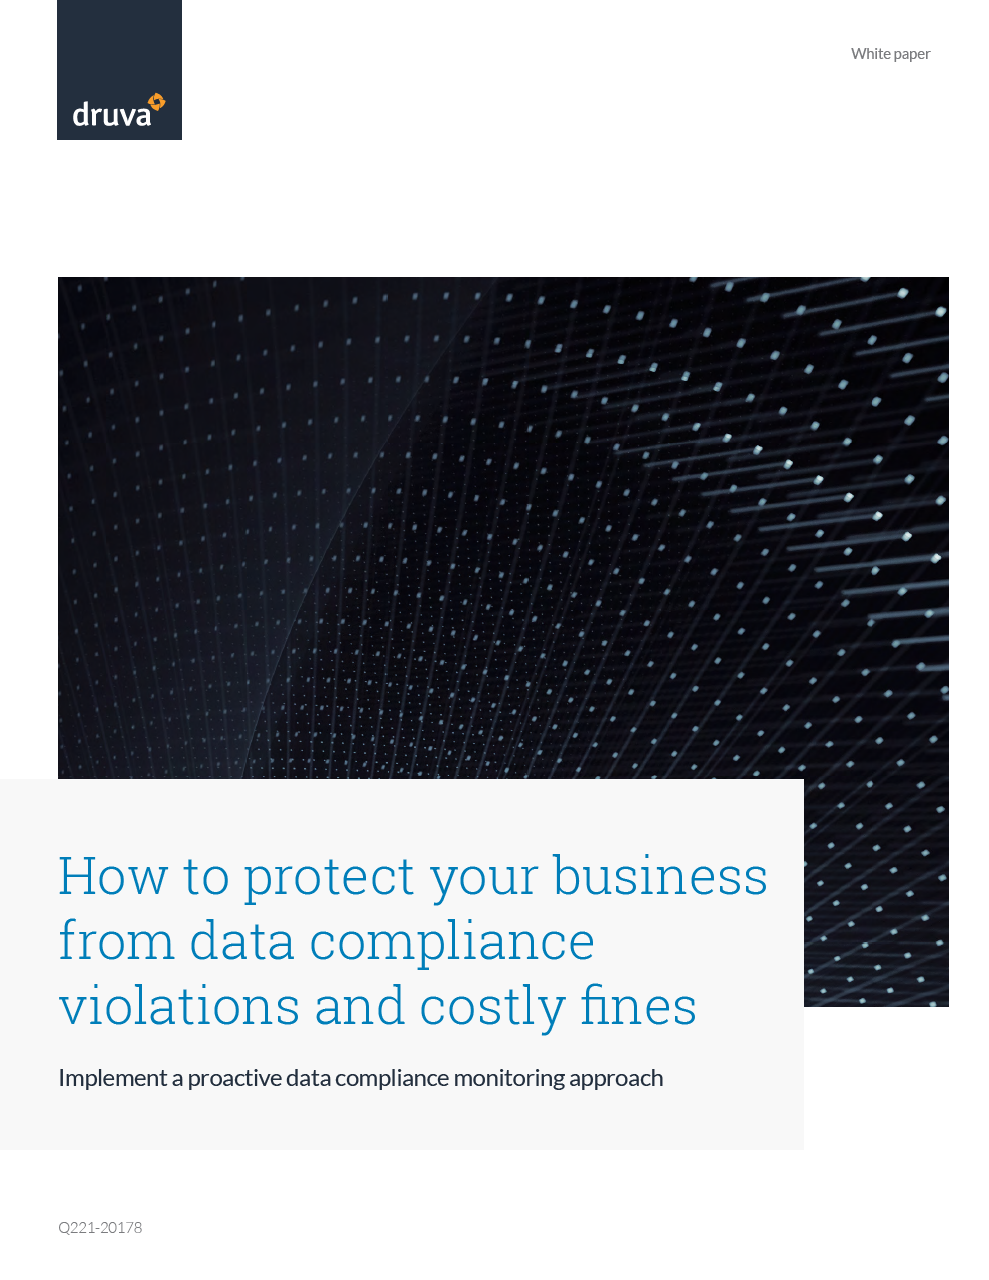 How to protect your business from data compliance violations and costly fines